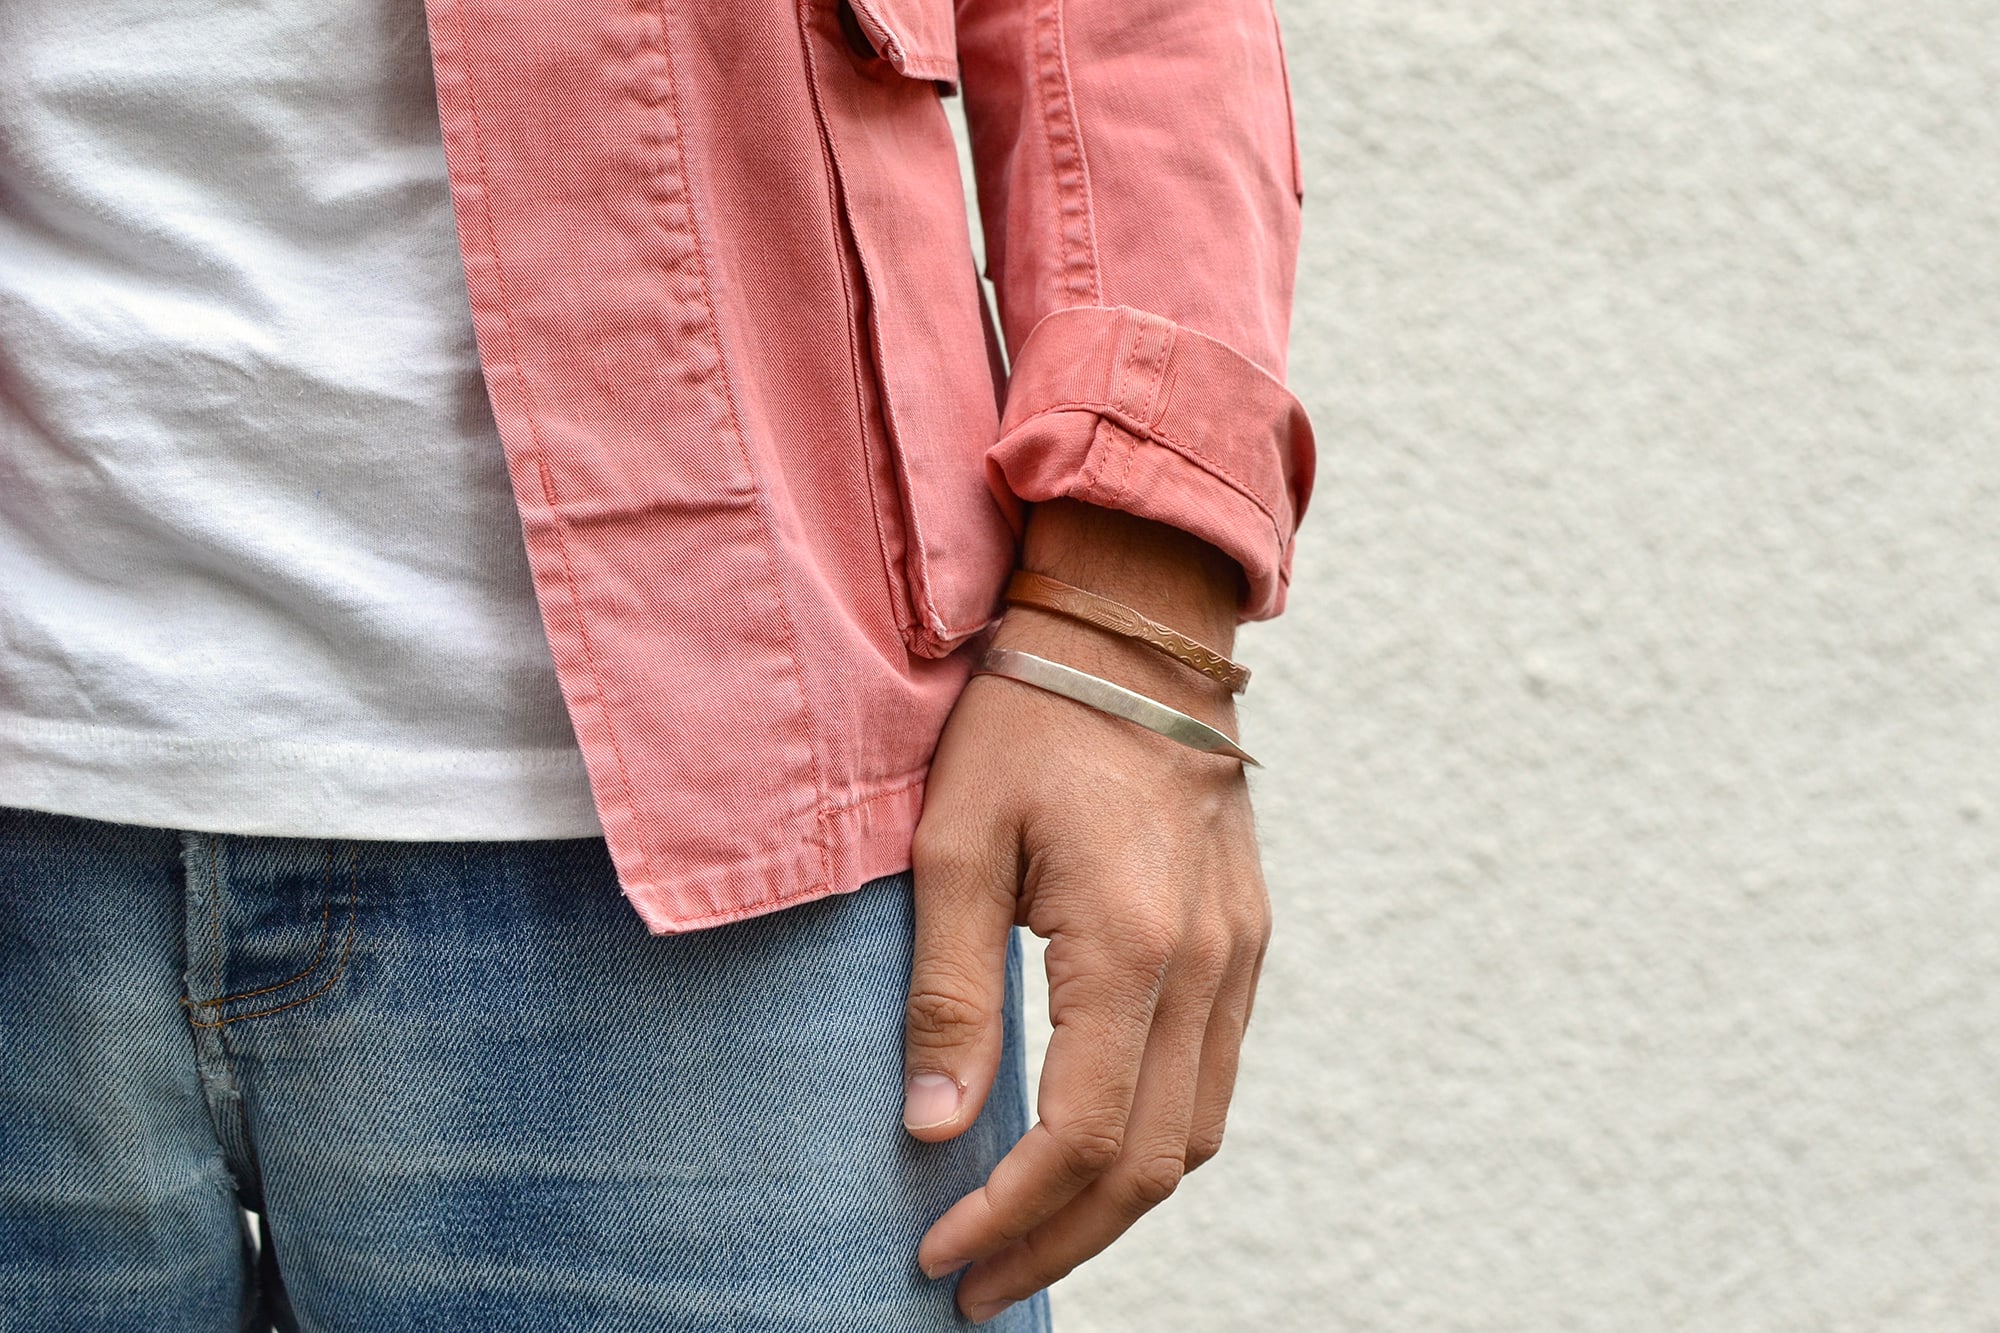 Visvim kilgore jacket salon pink SS 2012 and white tee with apc butler jeans